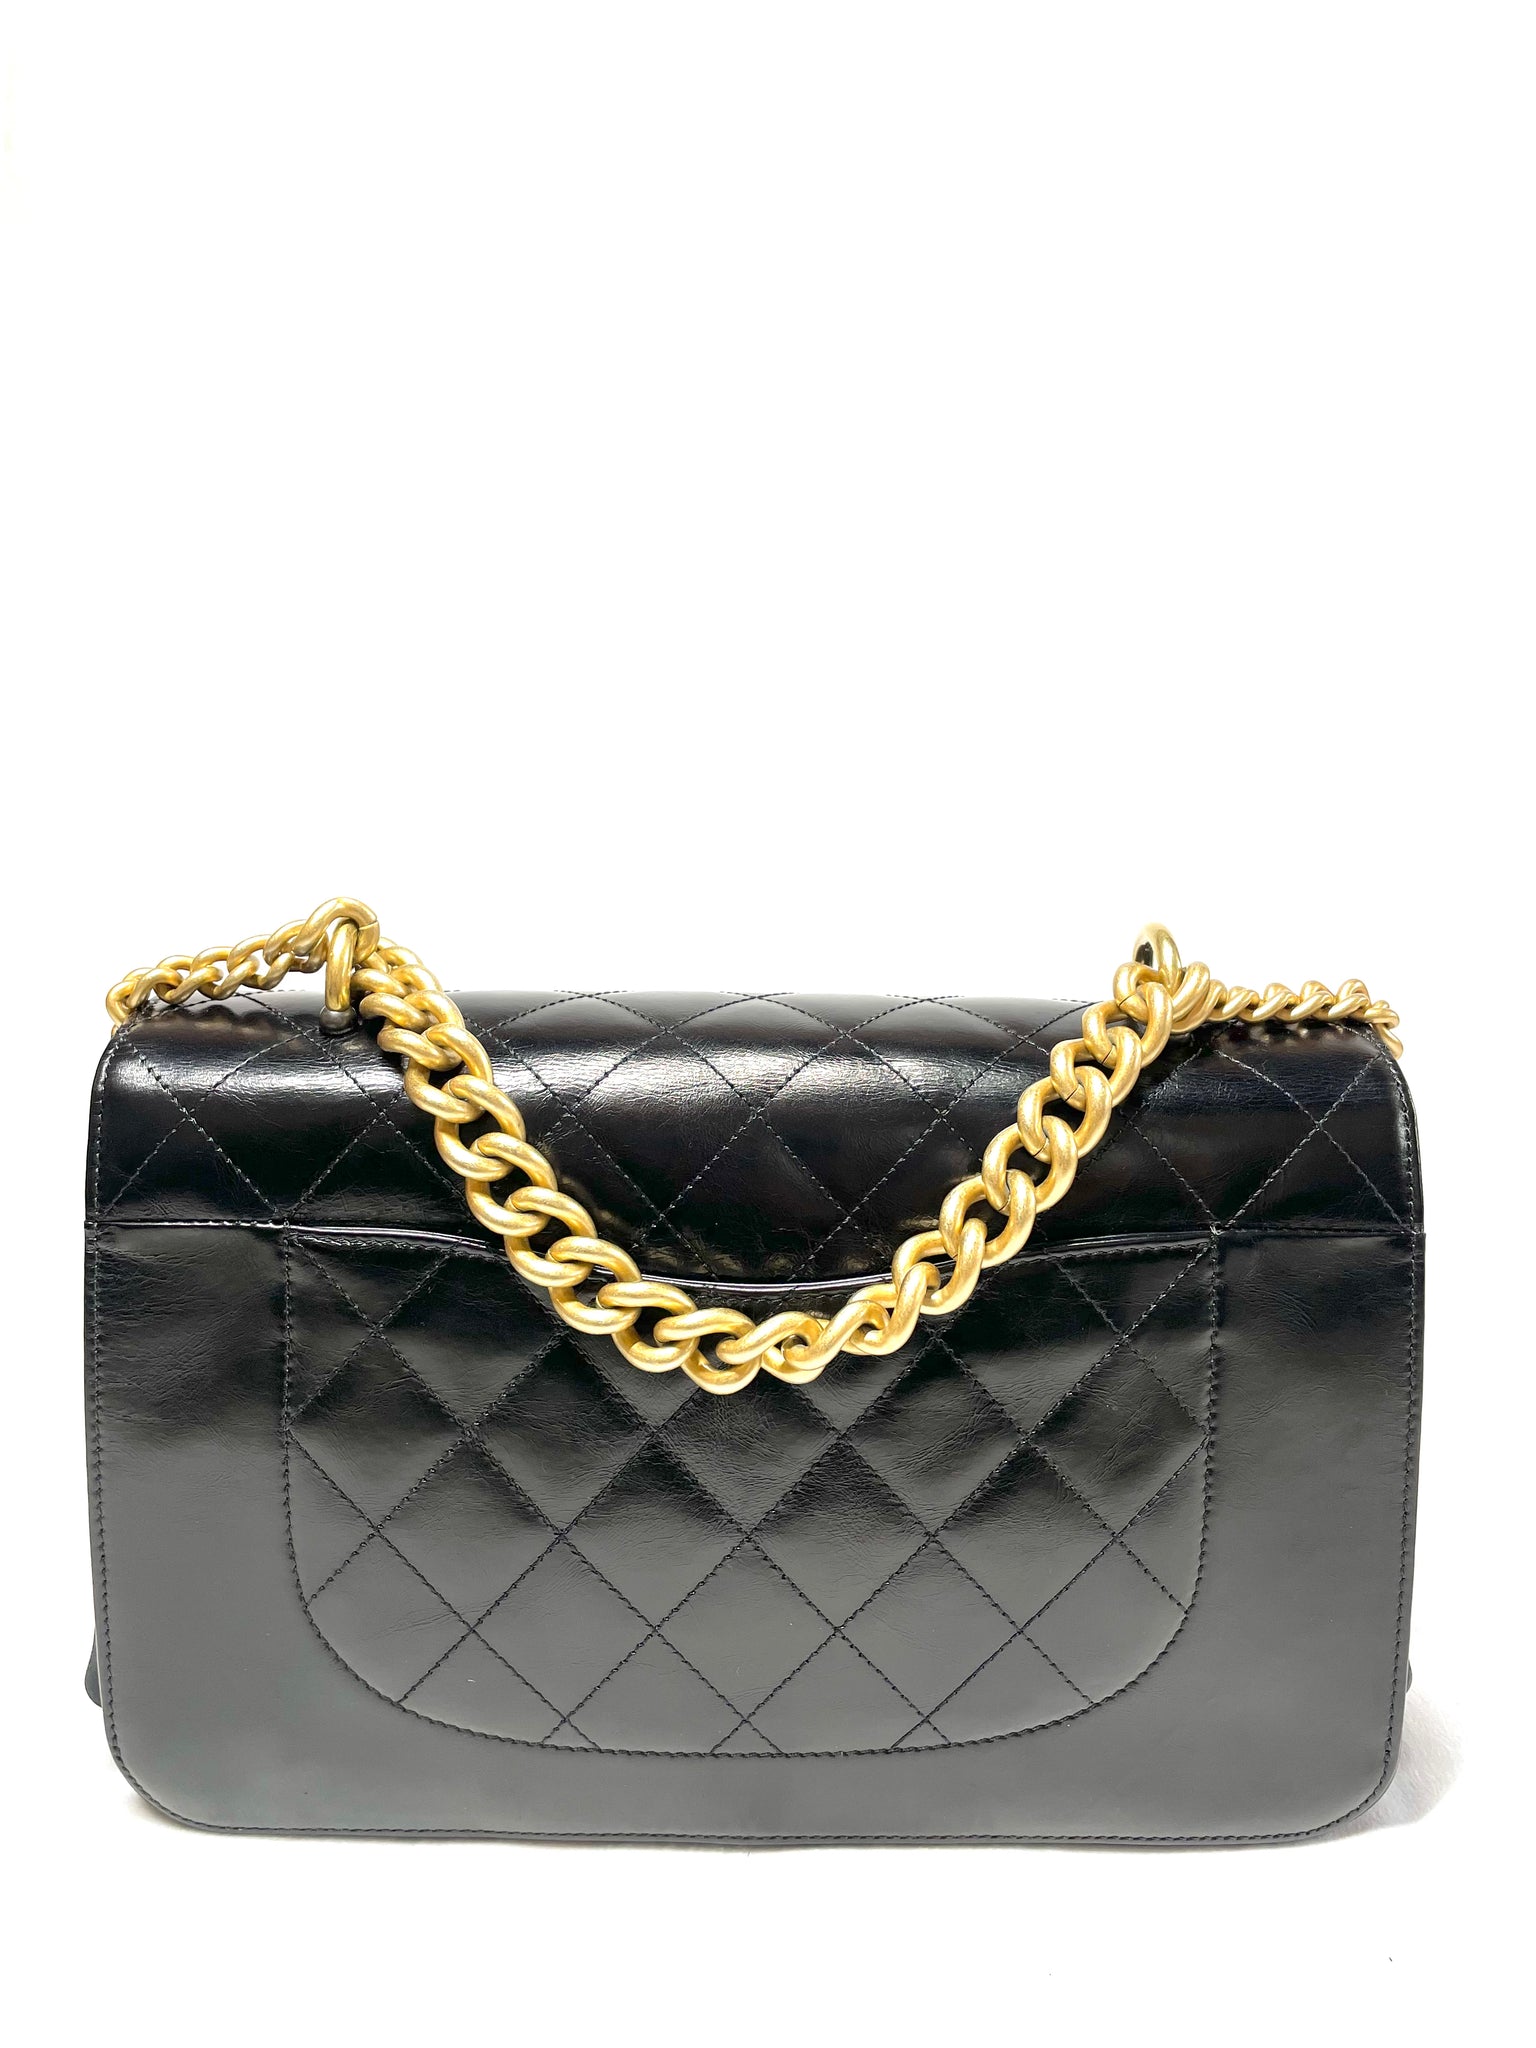 Photo of Chanel Cosmopolite Bag in black with gold hardware available at UniKoncept in Waterloo